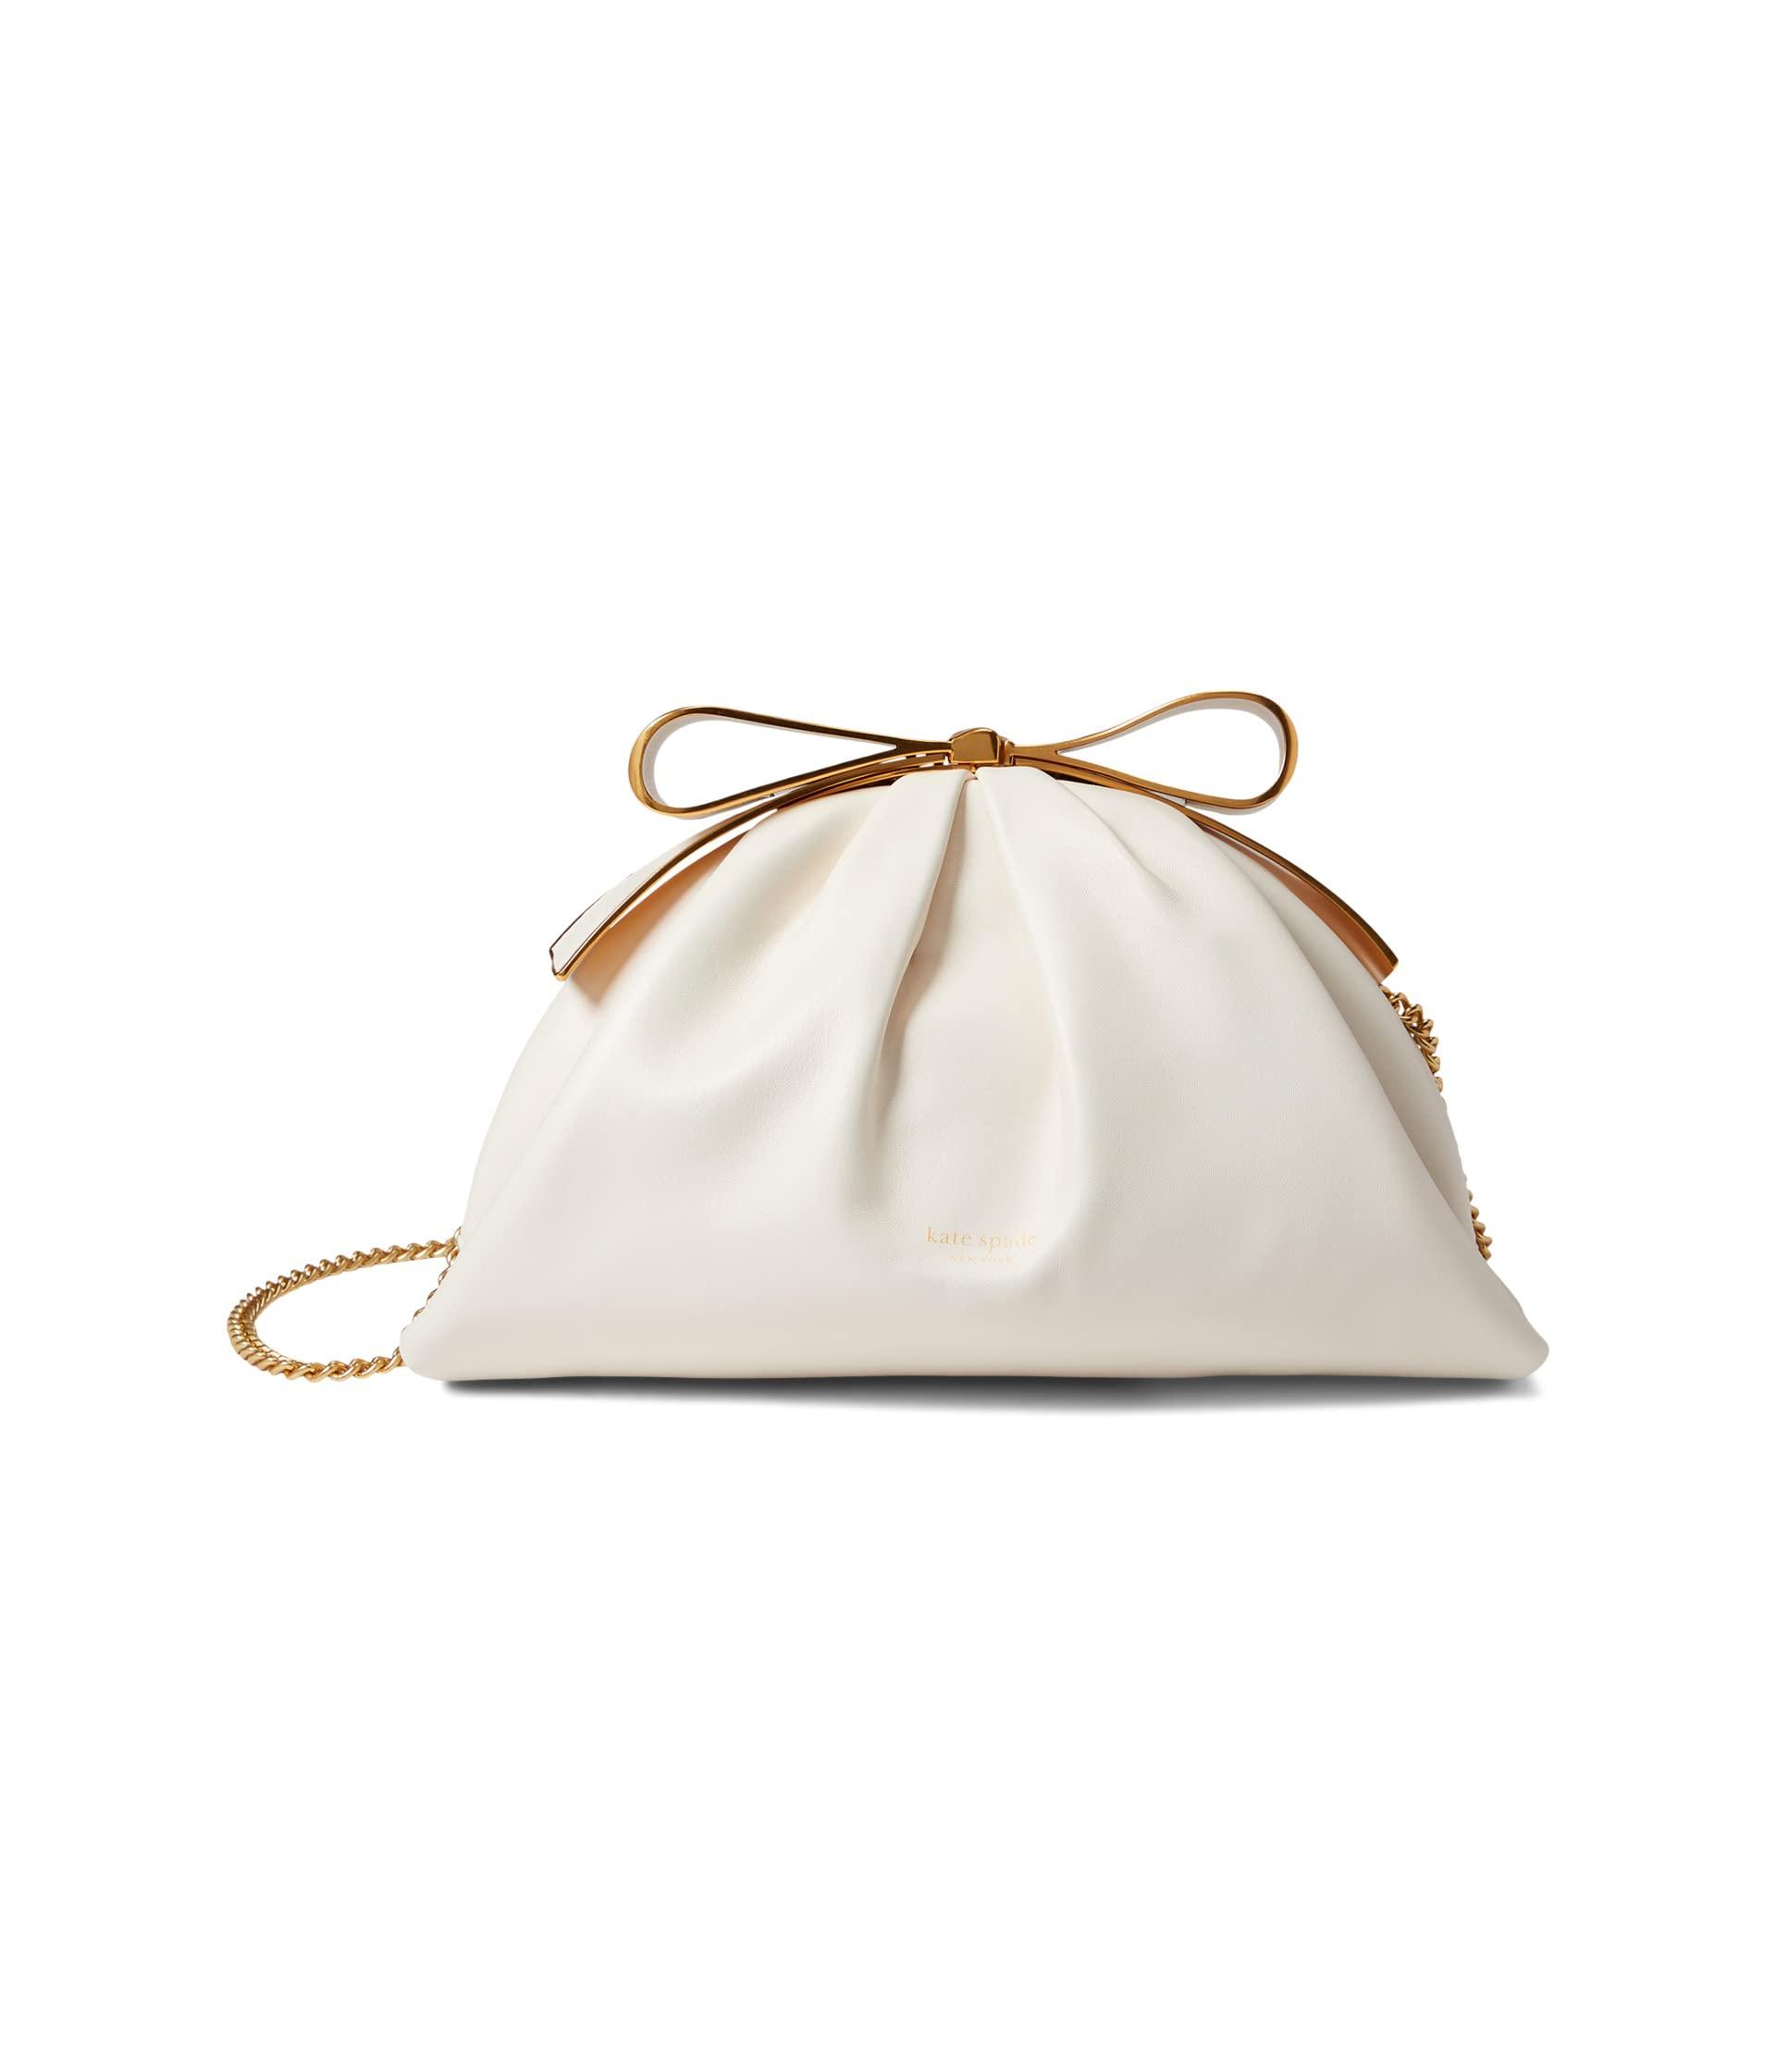 Kate Spade Bridal Pearlized Smooth Leather Bow Frame Clutch in White | Lyst